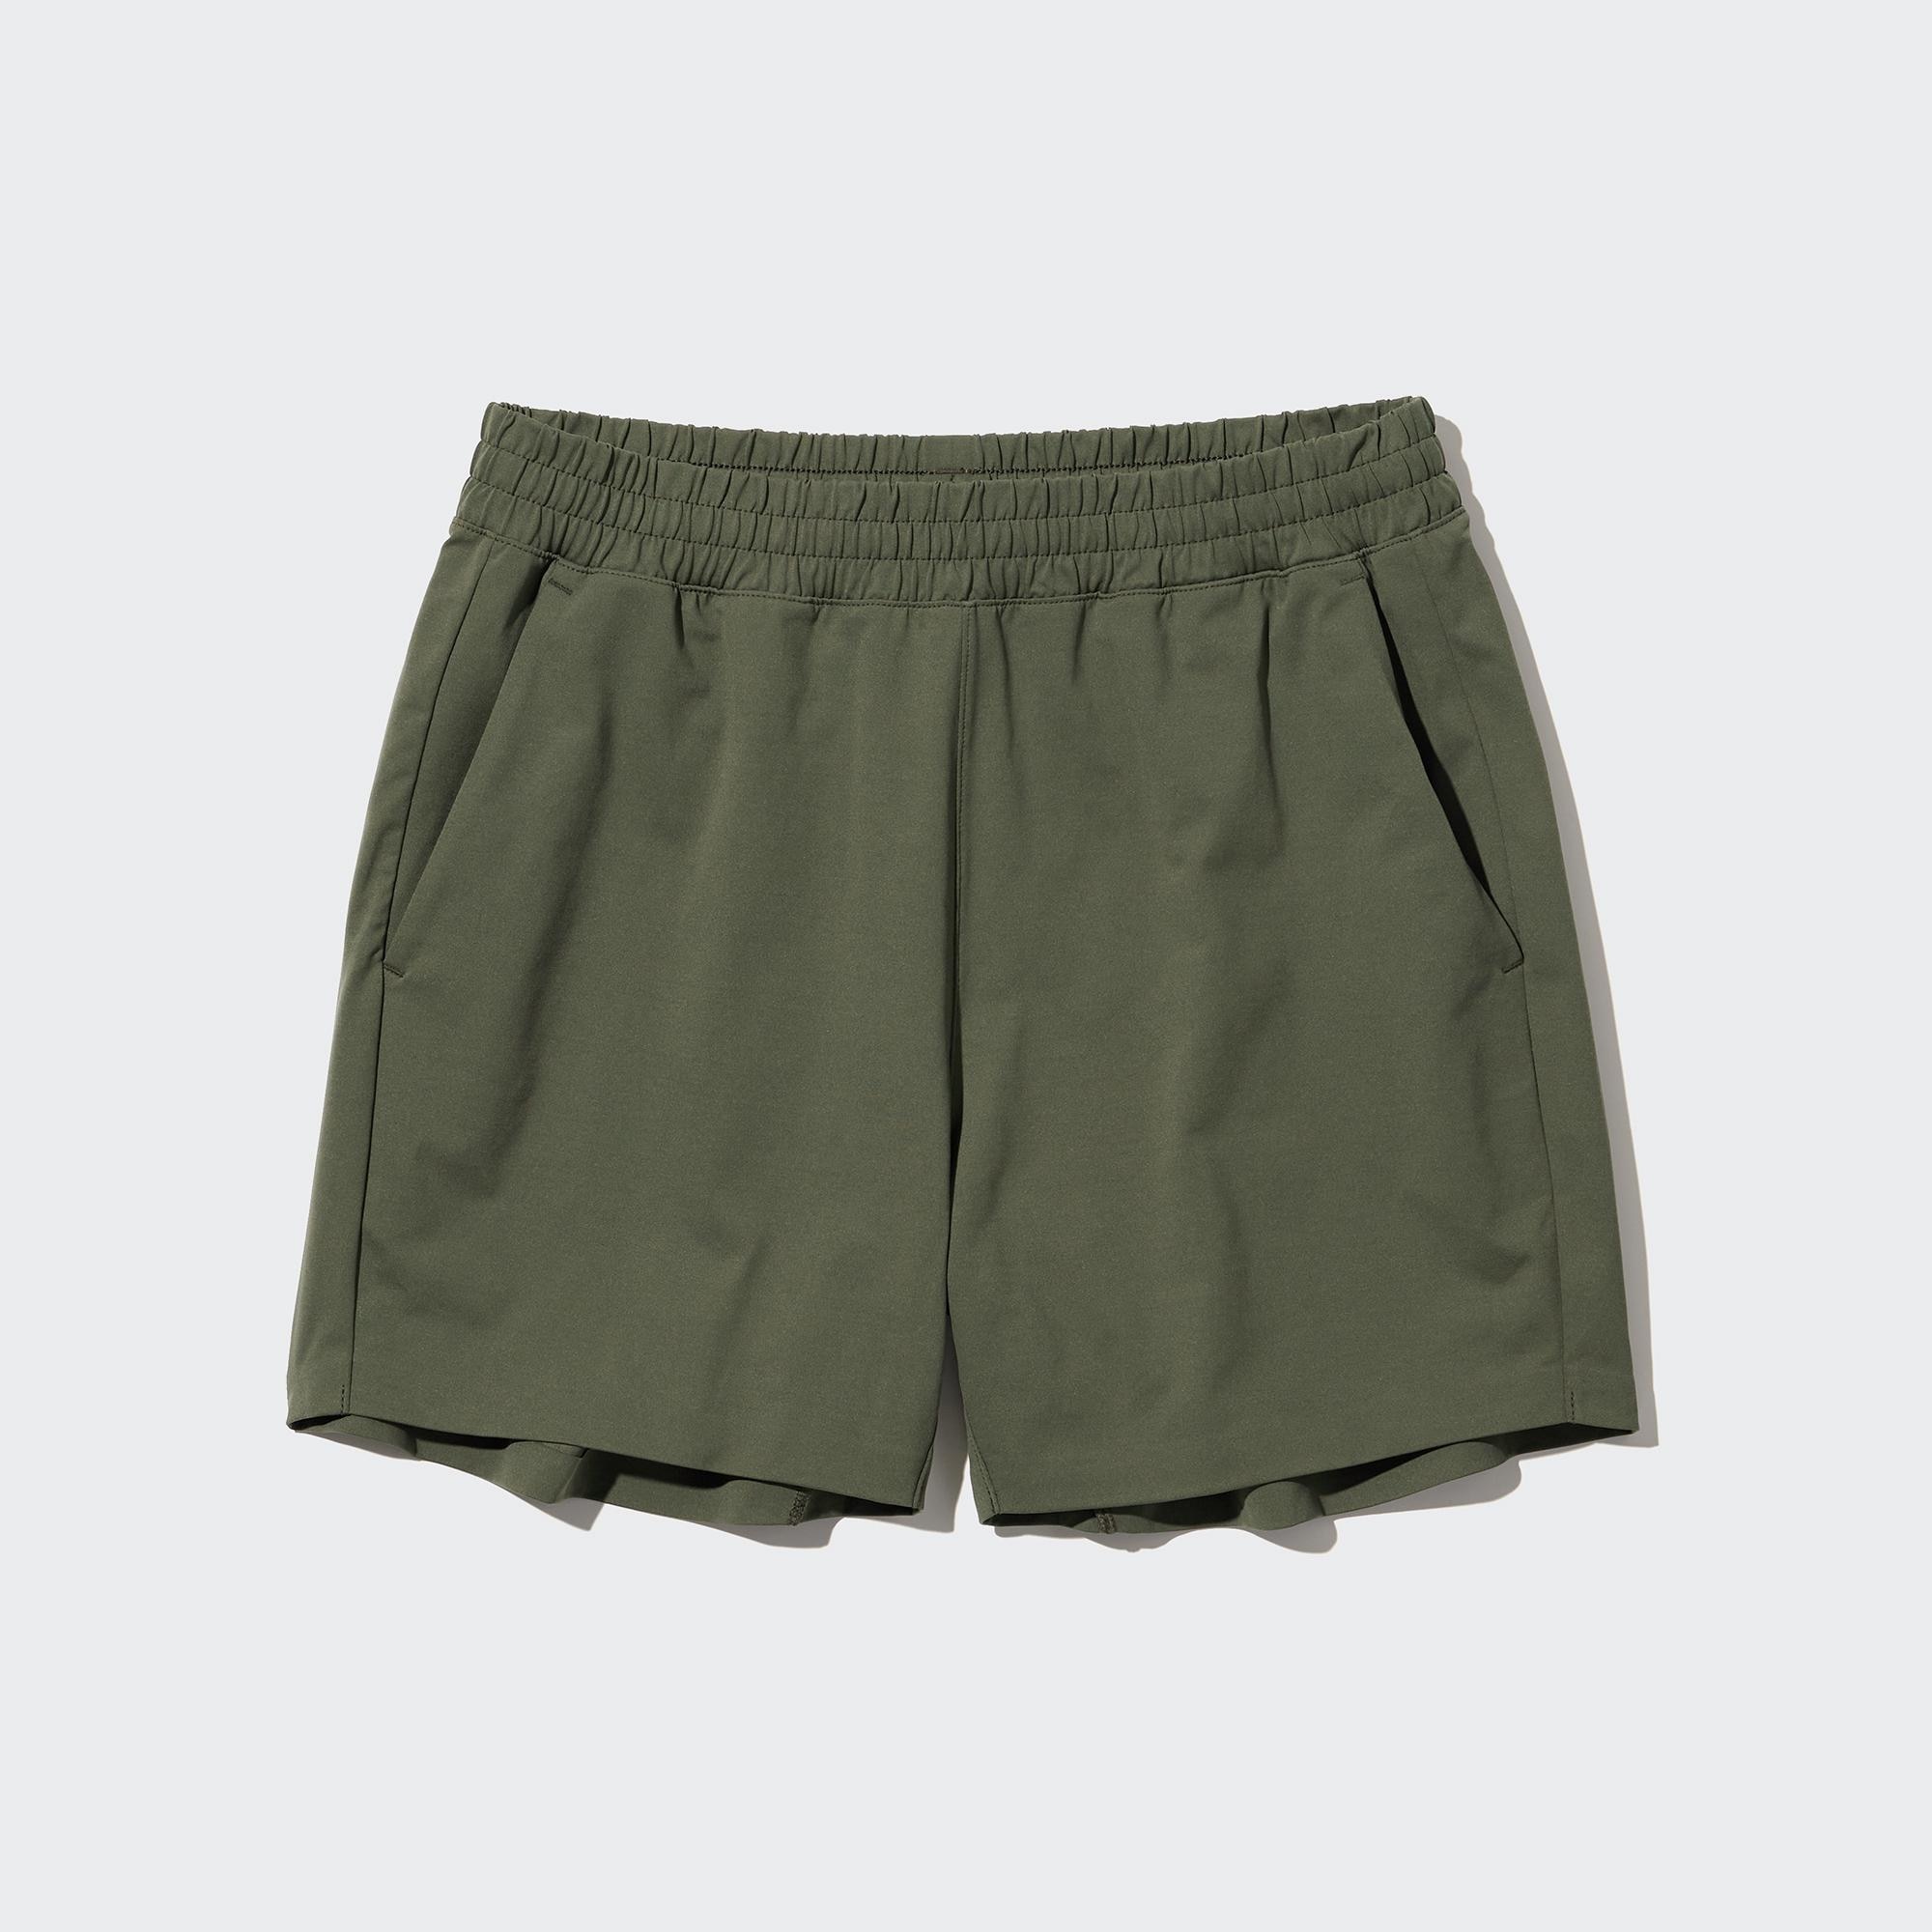 $10 increase in Uniqlo shorts, because 1% hike? : r/singapore